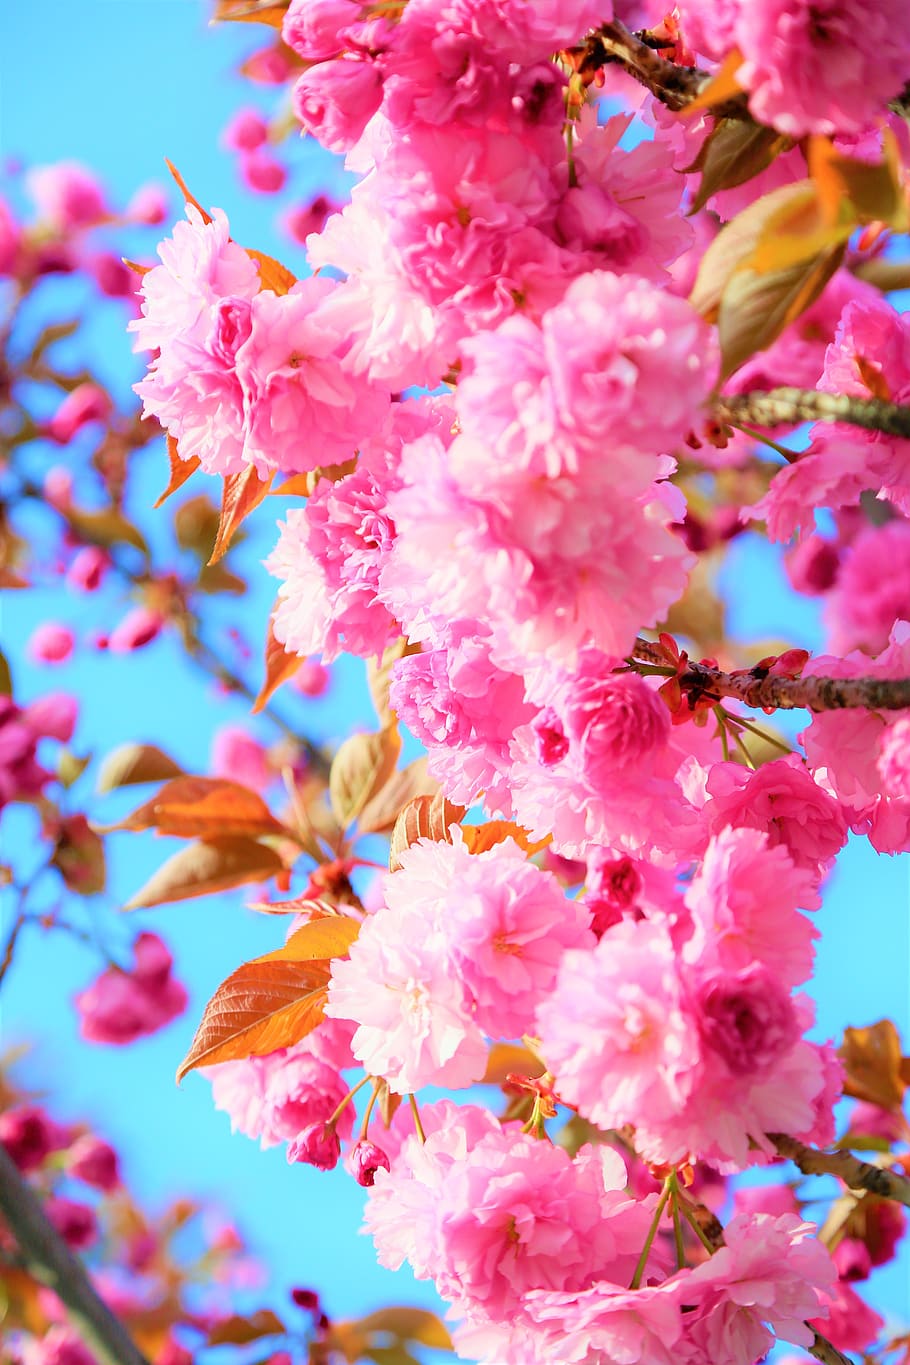 flowers, spring, flower, nature, plant, color, beautiful, blooming, pink, tree